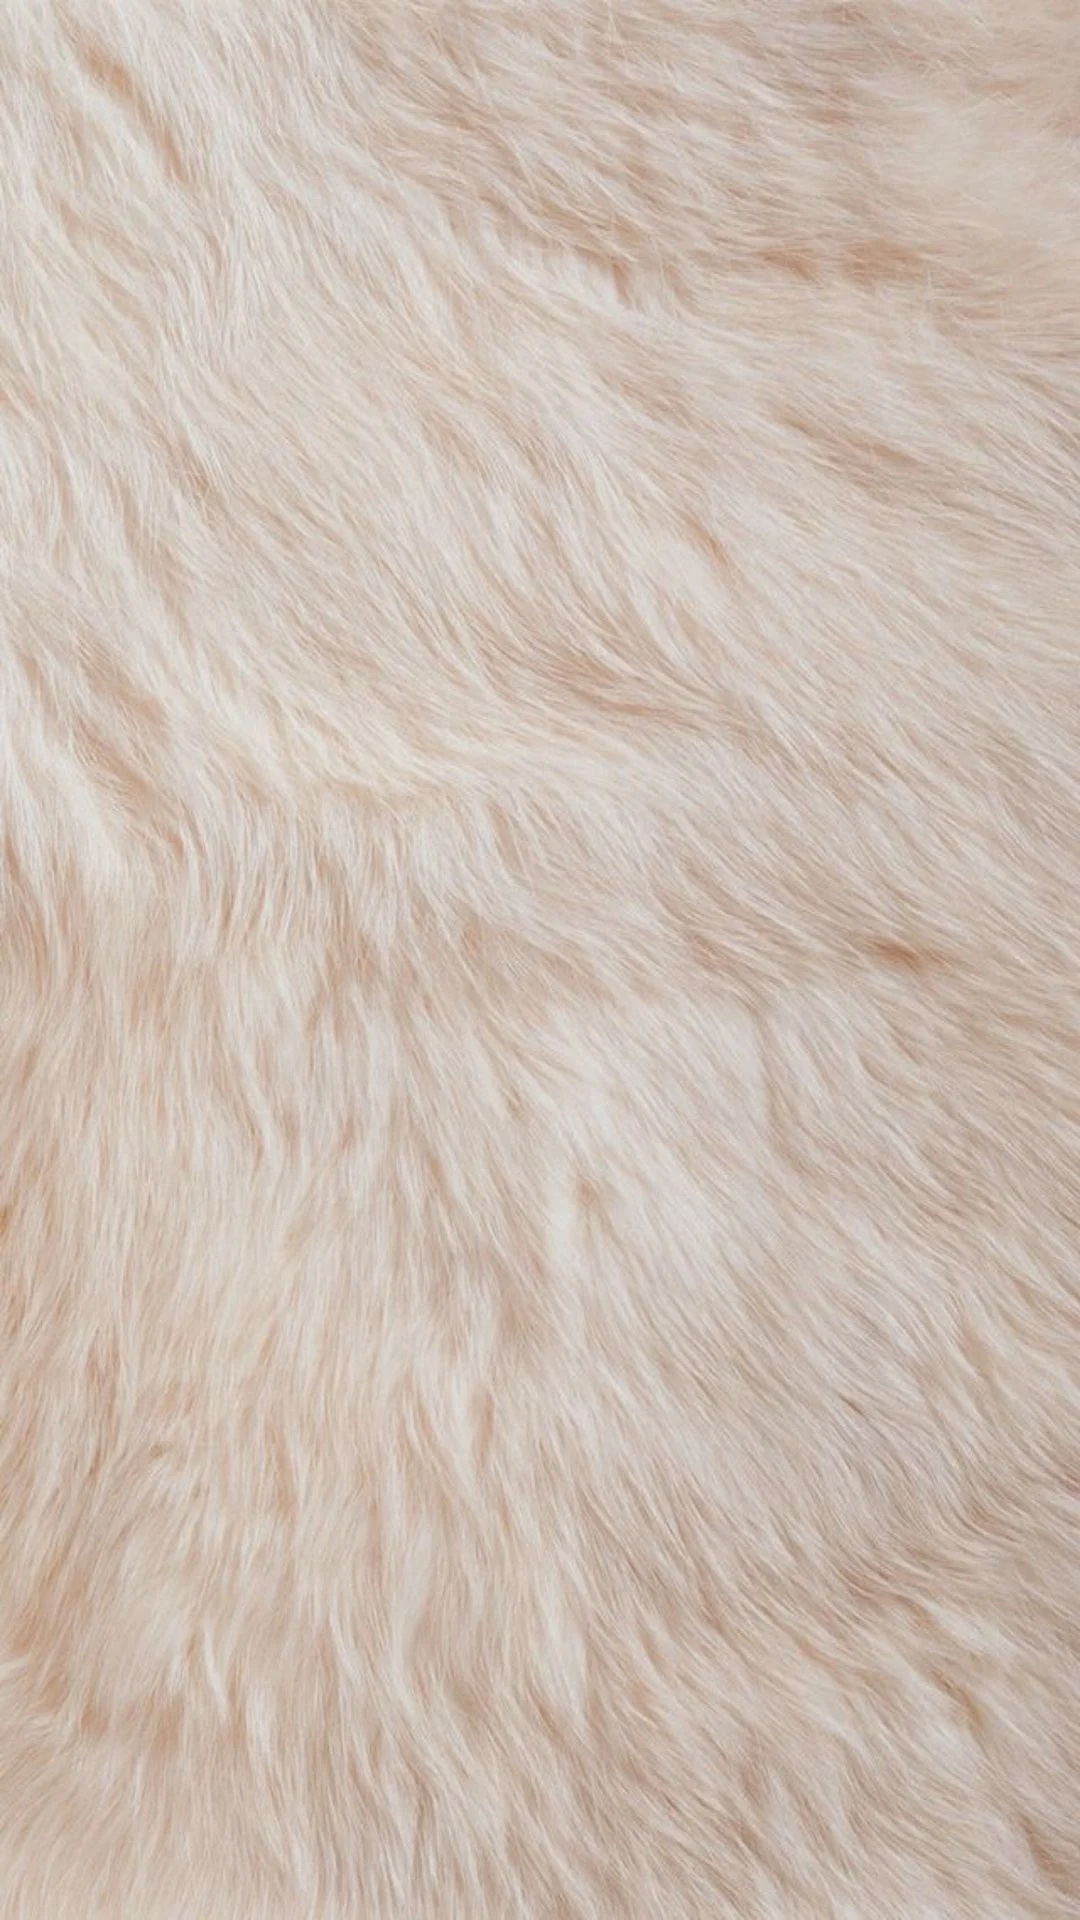 Fur wallpapers, Cozy textures, Warm and fuzzy, Comfortable backgrounds, 1080x1920 Full HD Handy